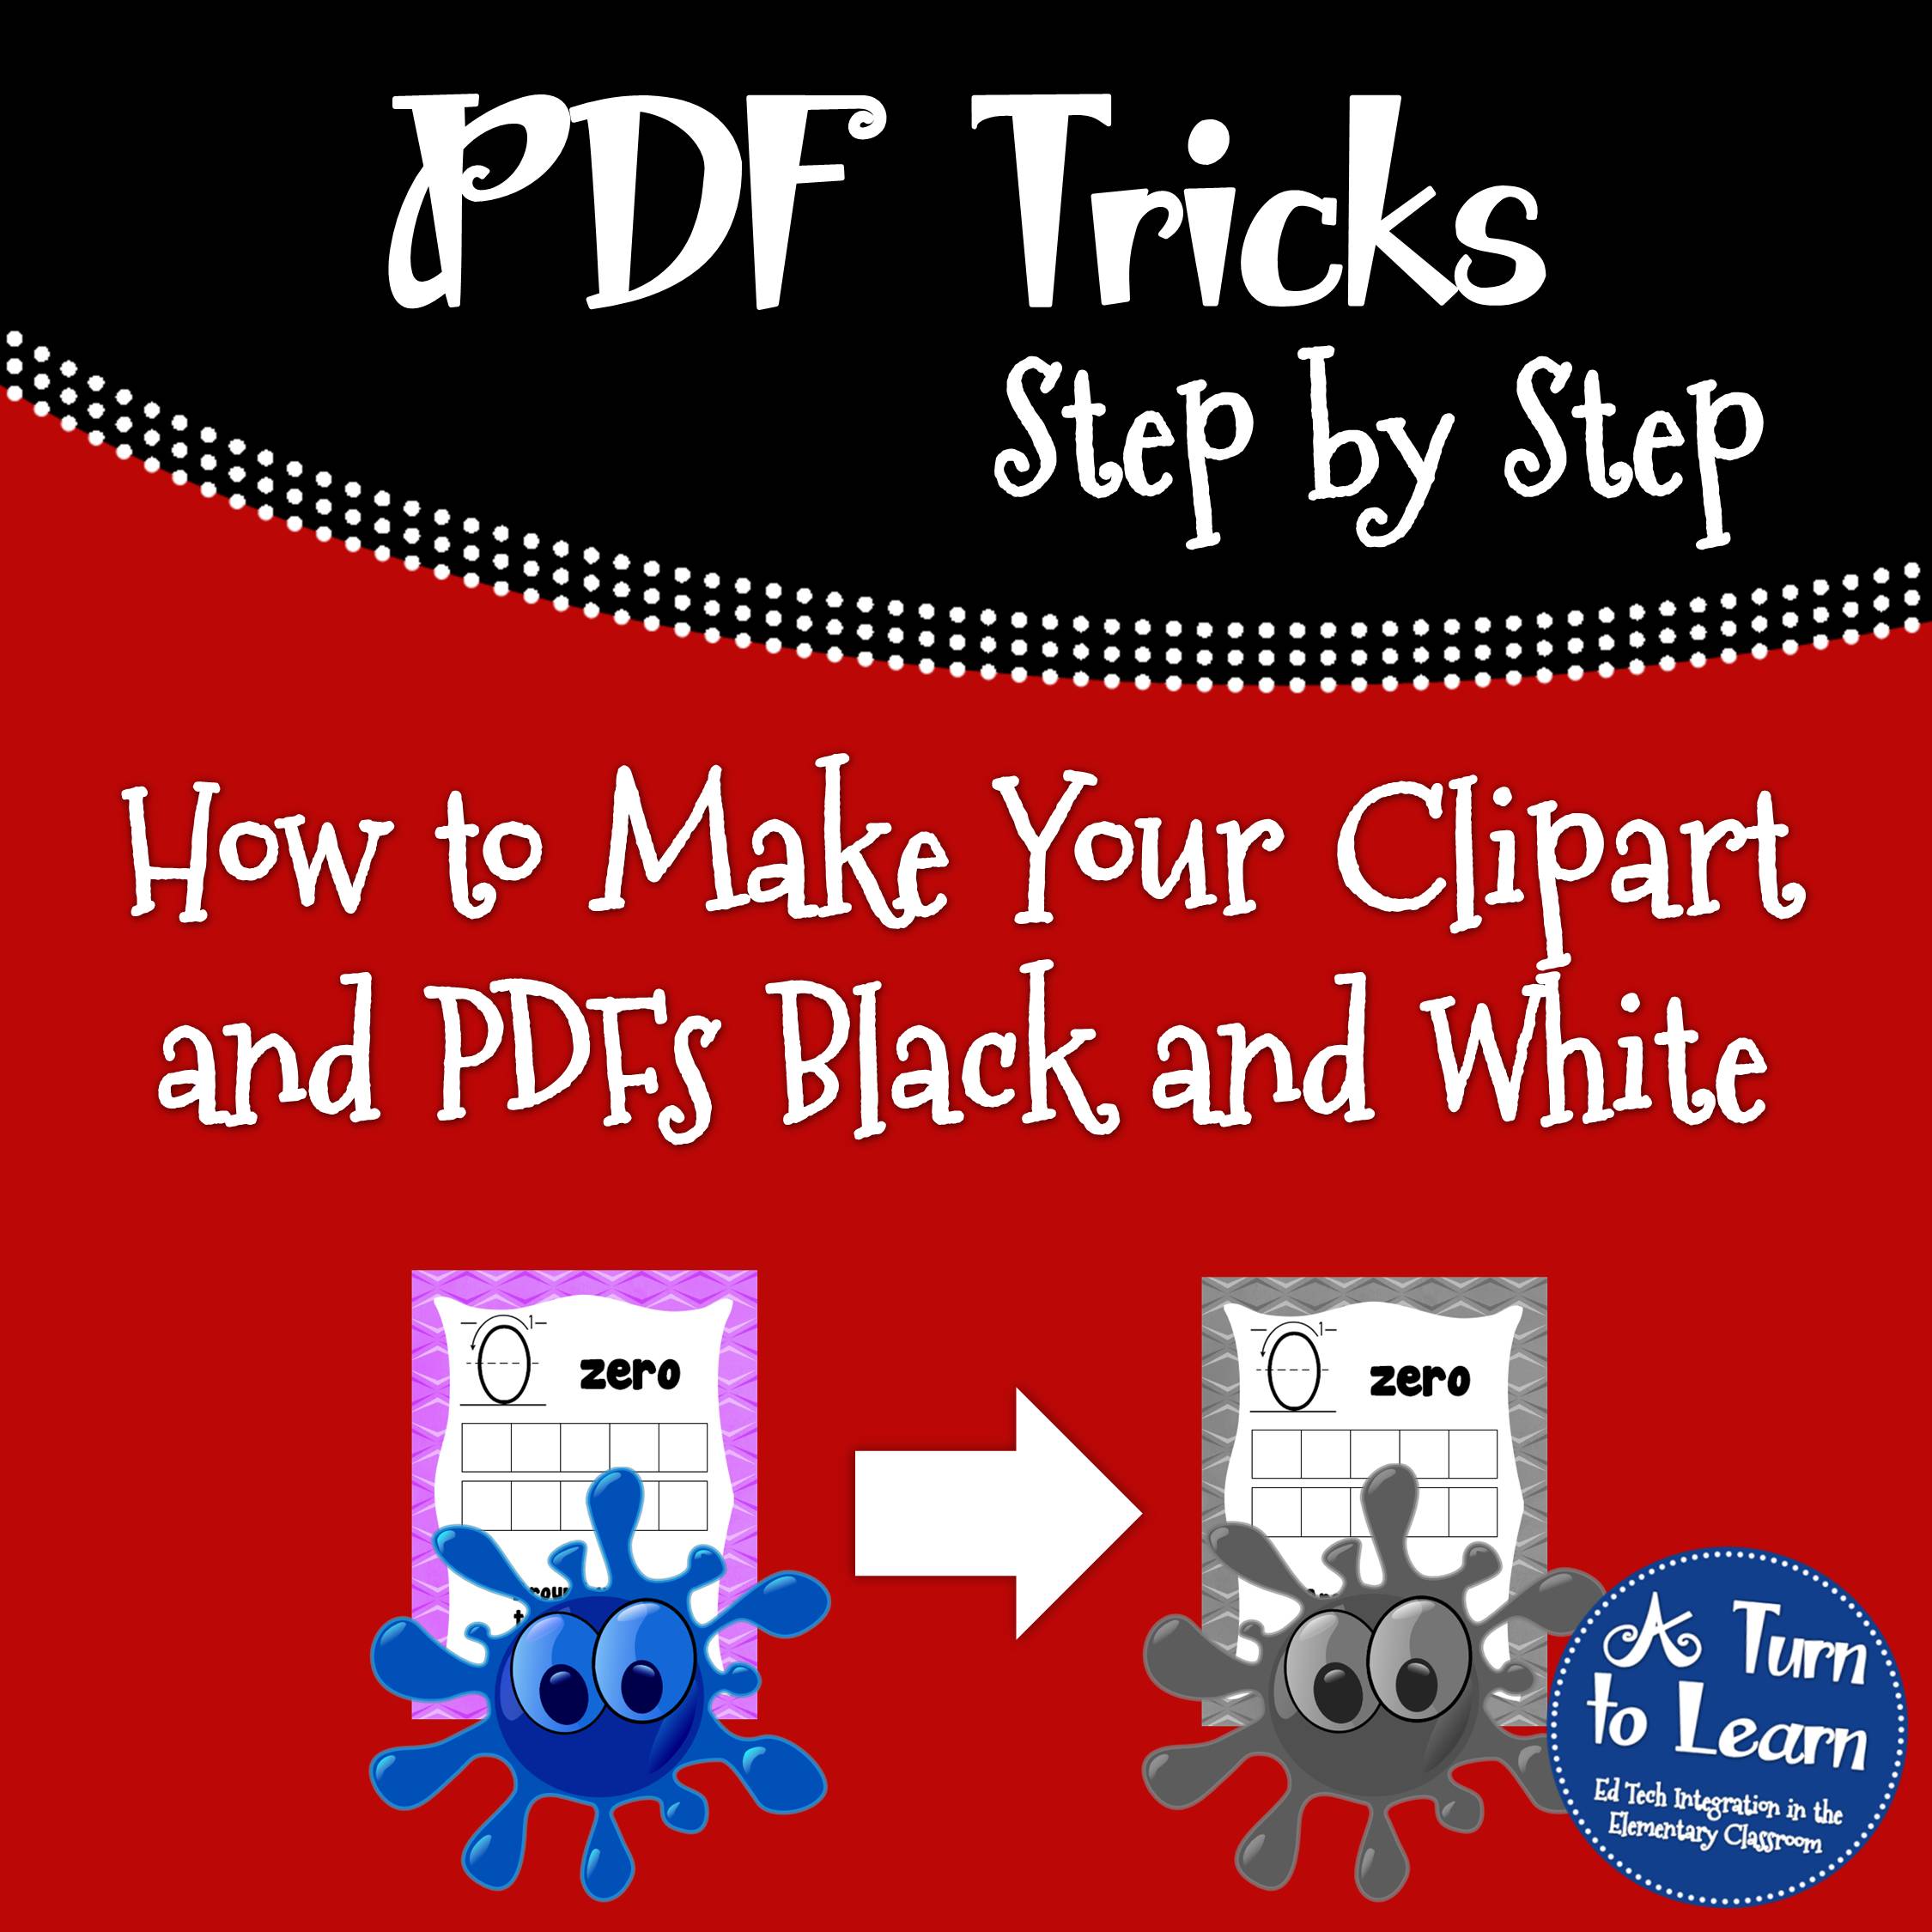 How to Make Your Clipart and PDFs Black and White